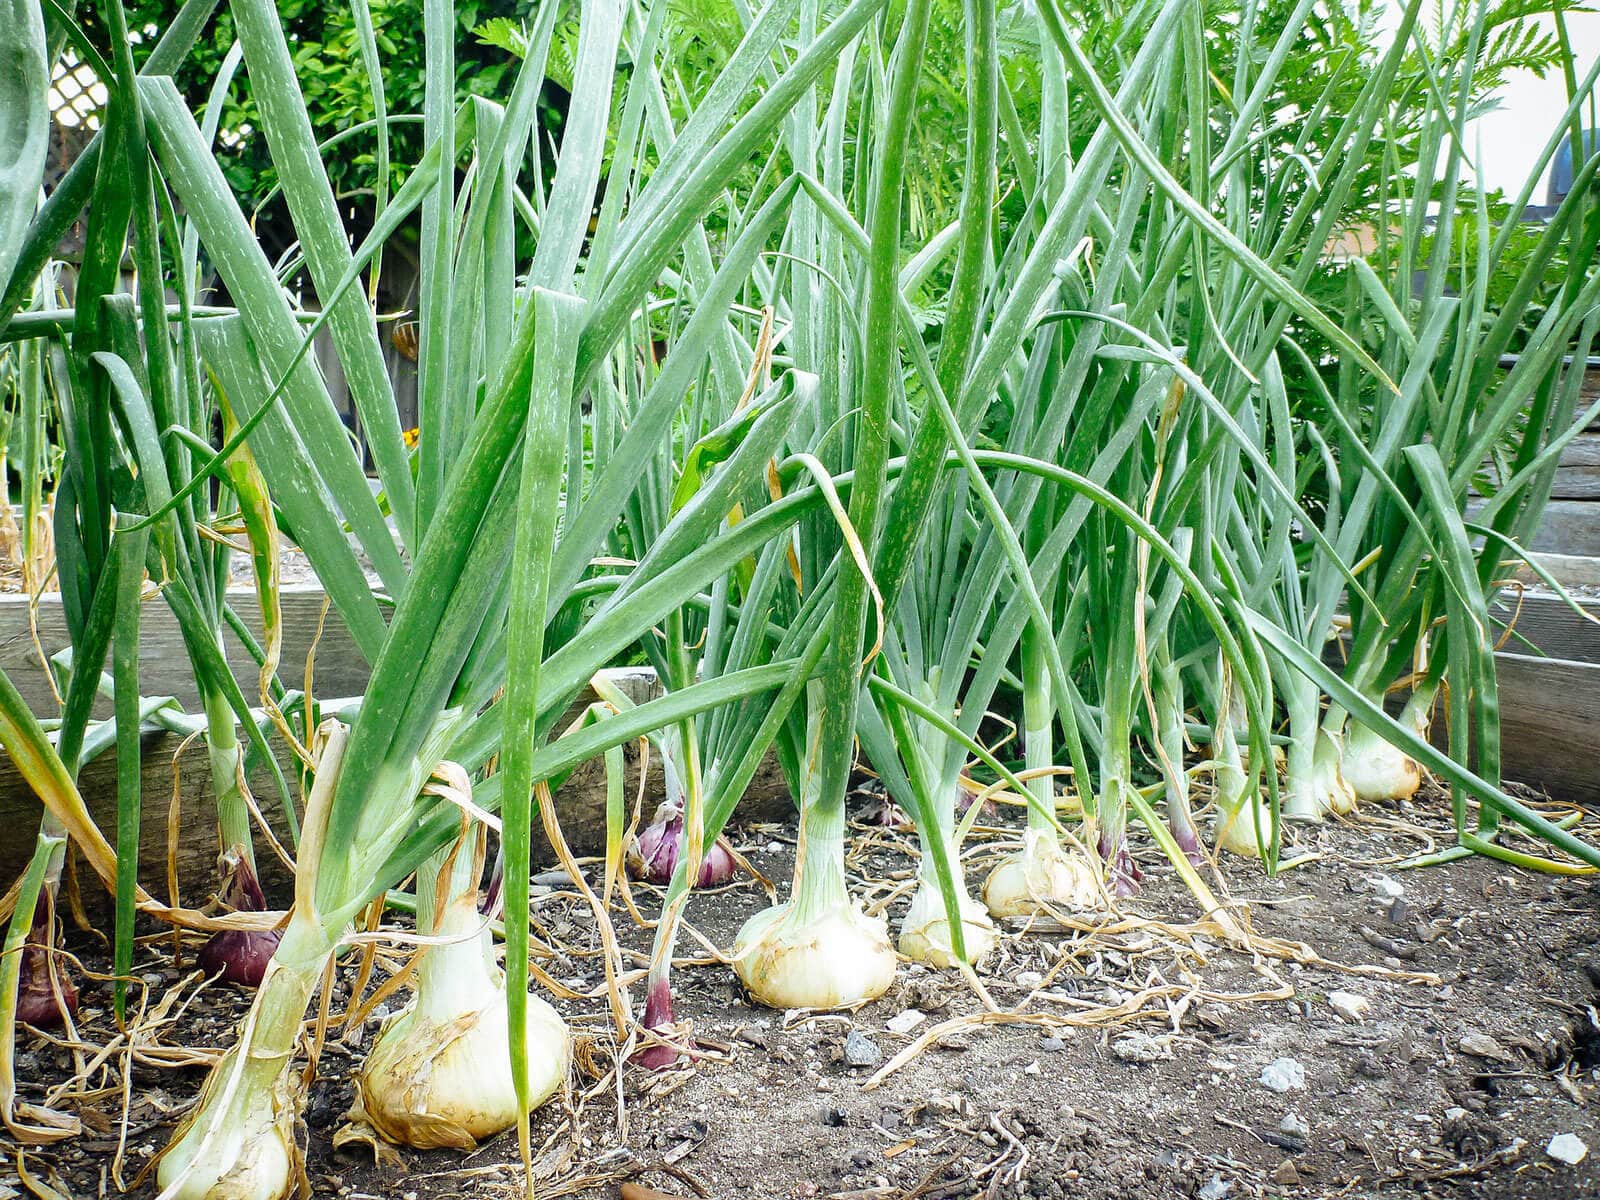 Mature onion plants in a garden bed